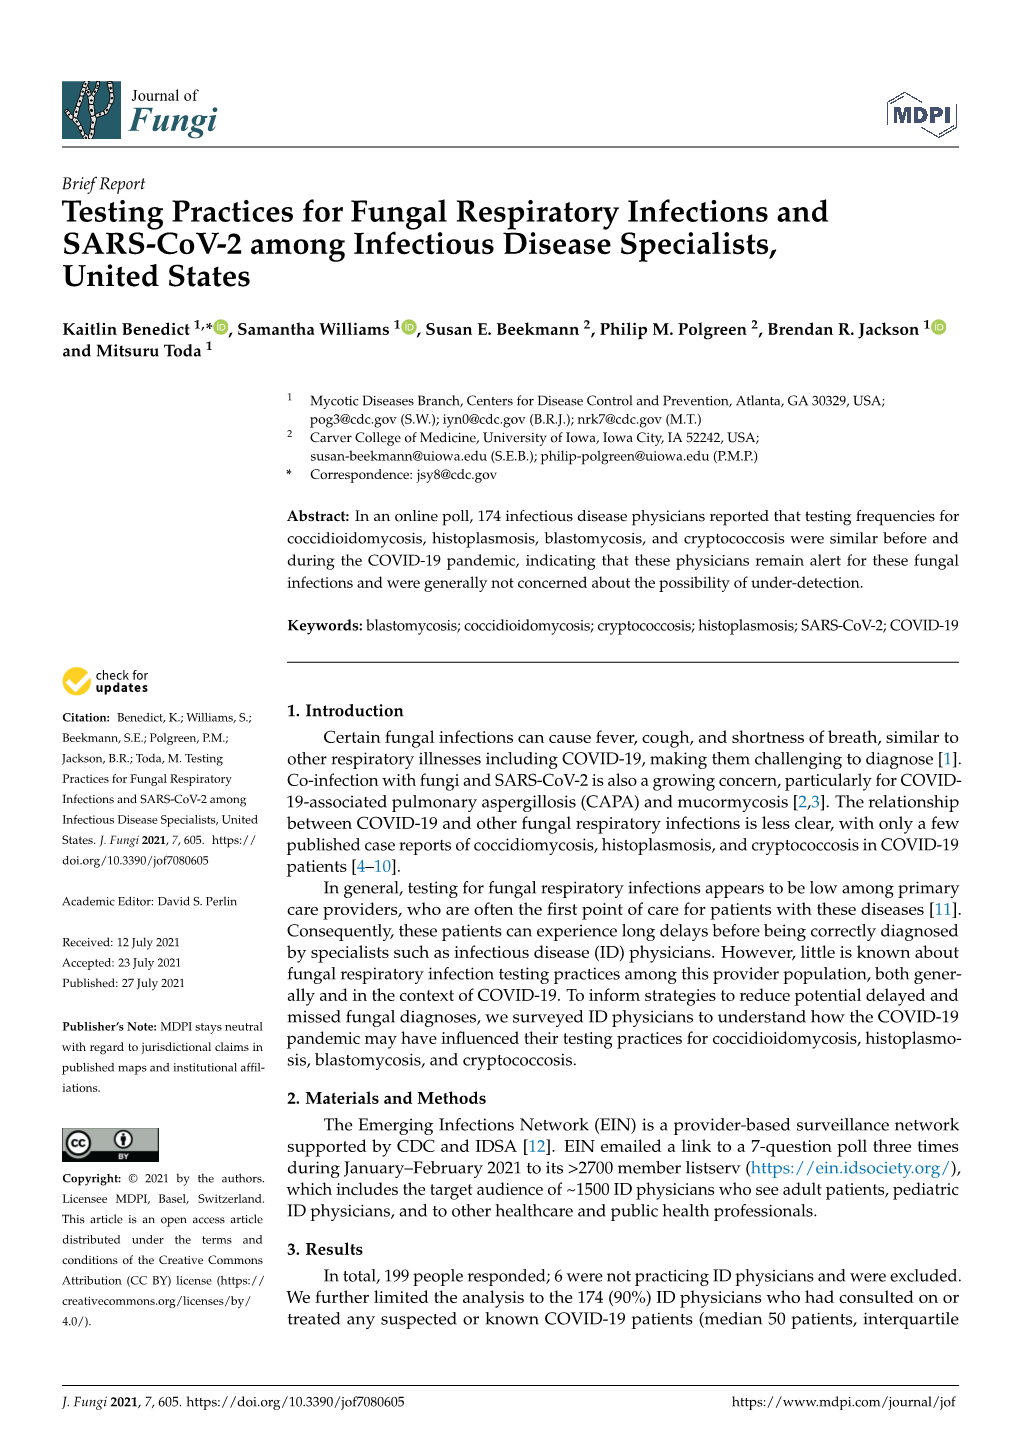 Testing Practices for Fungal Respiratory Infections and SARS-Cov-2 Among Infectious Disease Specialists, United States